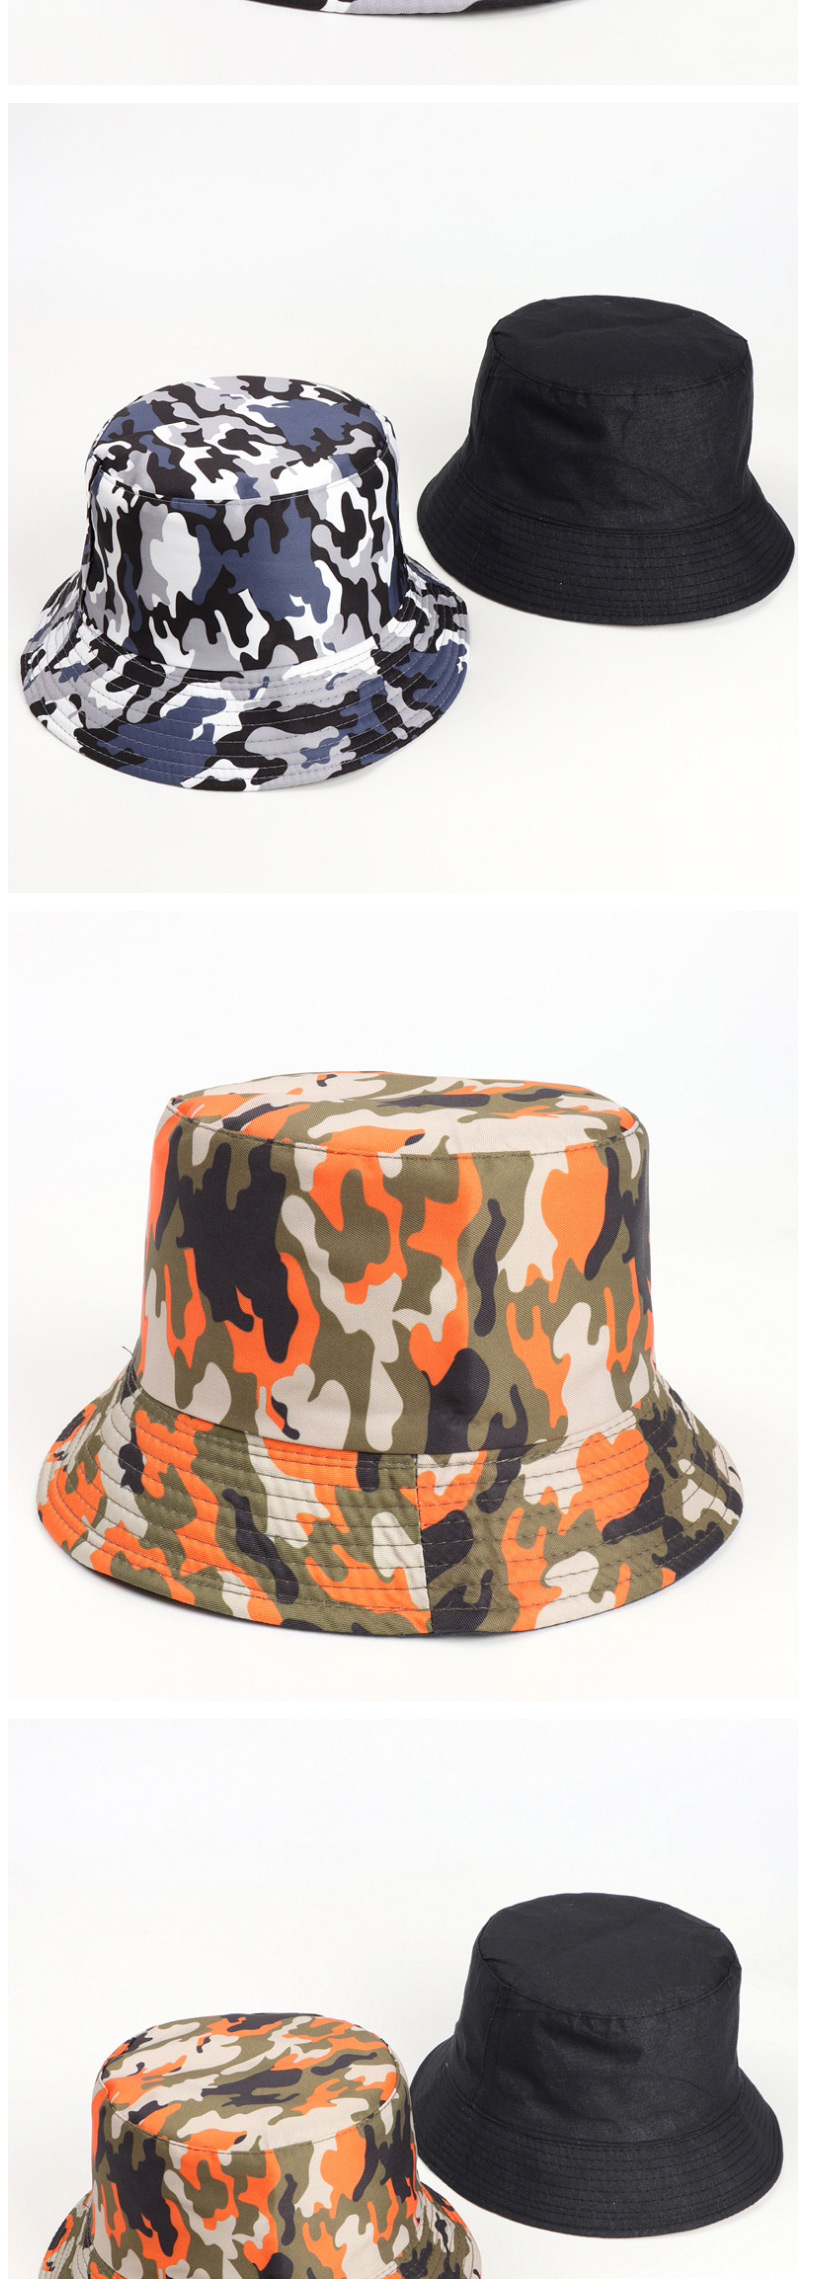 Fashion Digital Camouflage-green Printed Double-sided Multicolor Camouflage Fisherman Hat,Sun Hats